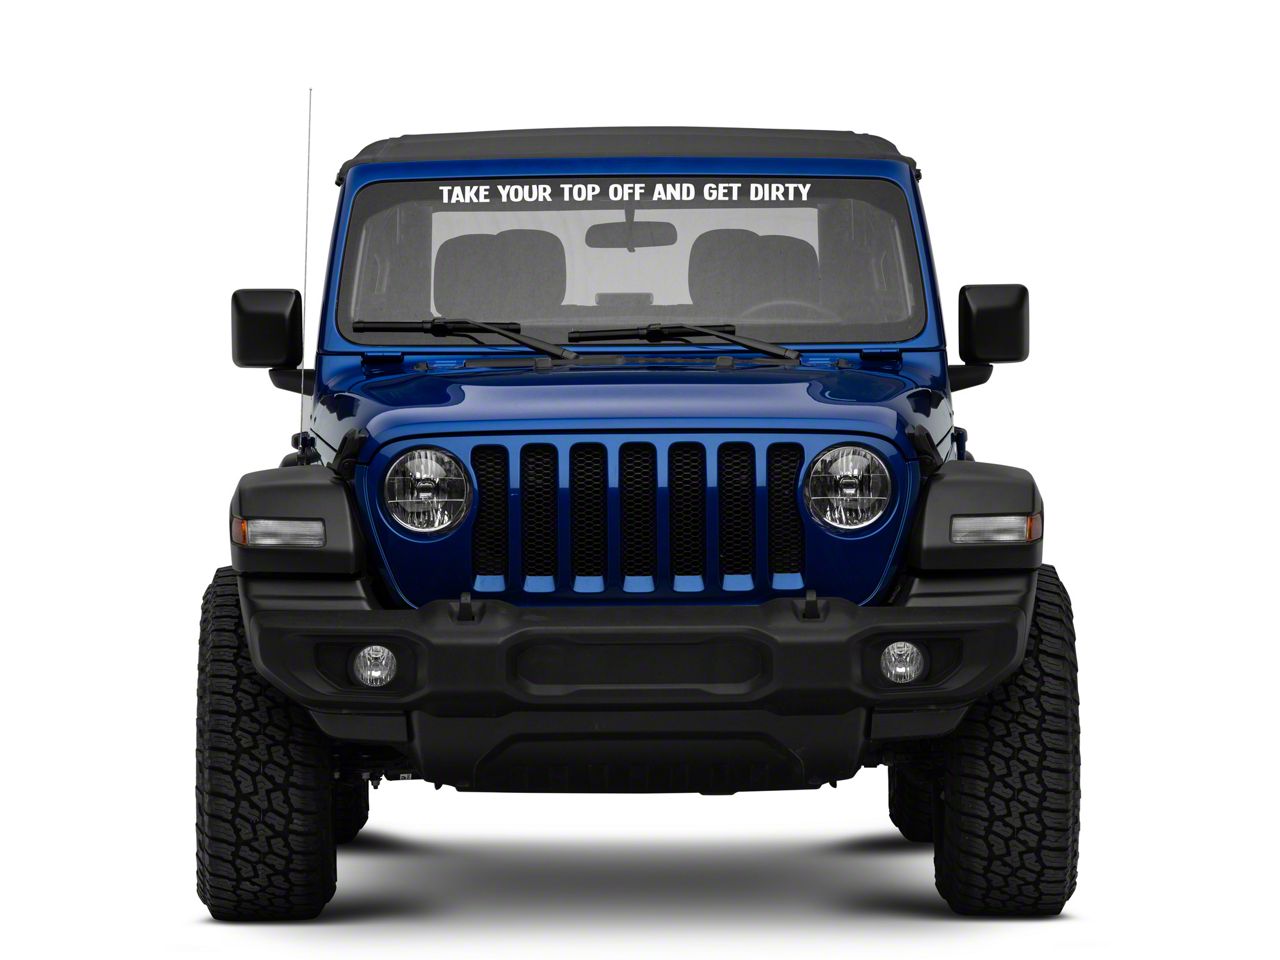 in White 2x42 inch for Hard Or Soft Top Removed Solar Graphics USA Windshield Sticker Decal Compatible with Wrangler for Flat Glass- Take Your Top Off 